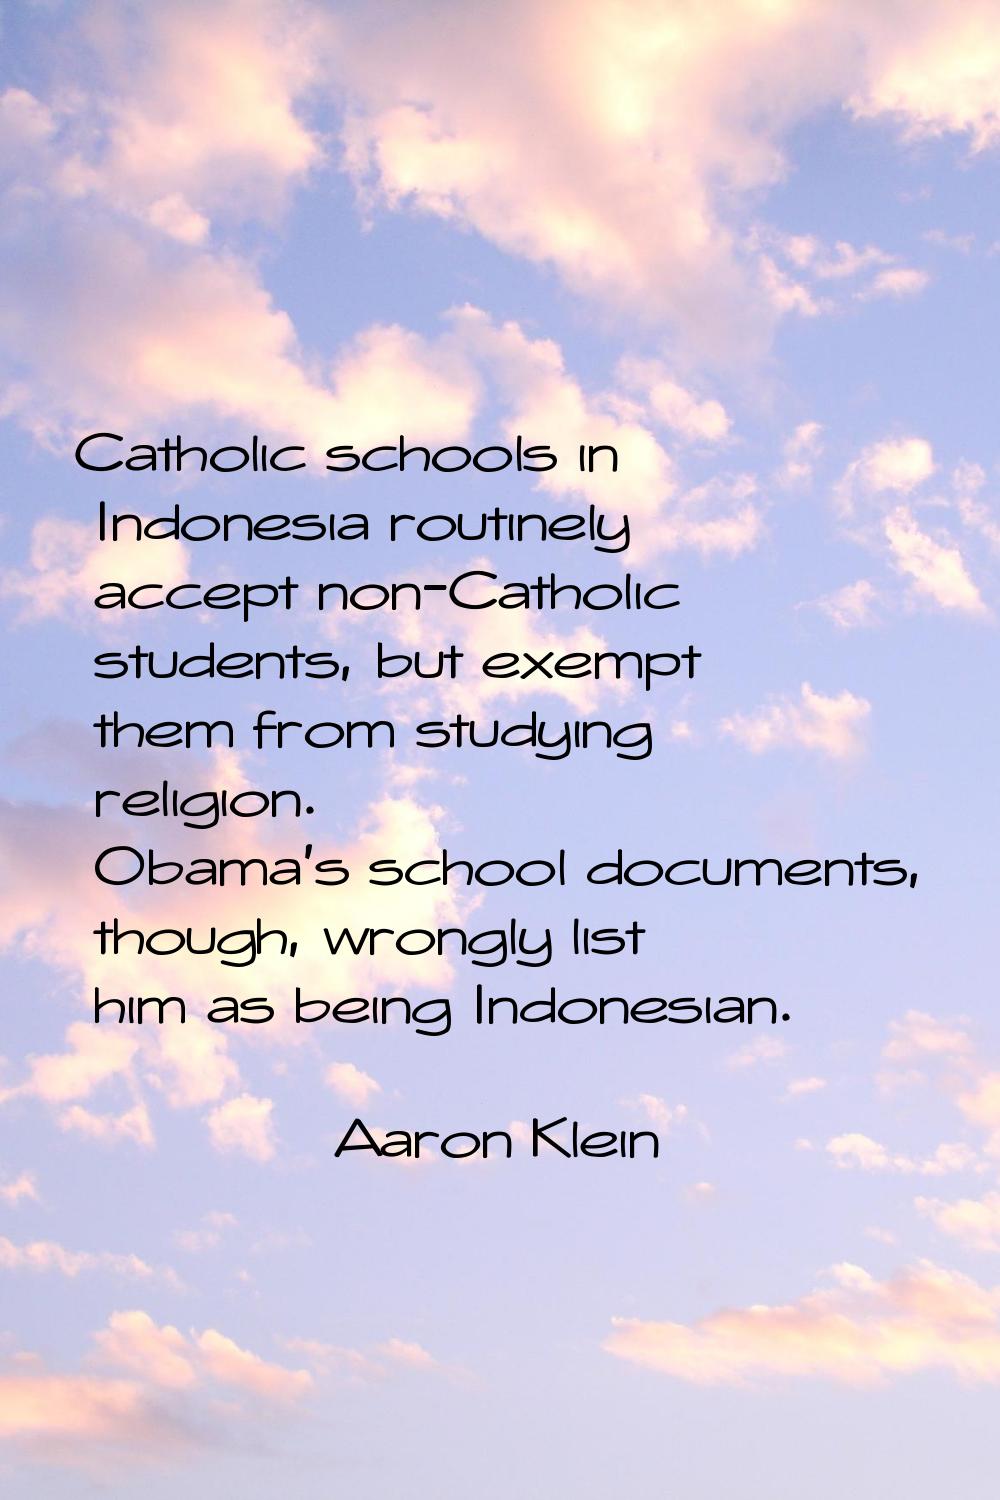 Catholic schools in Indonesia routinely accept non-Catholic students, but exempt them from studying